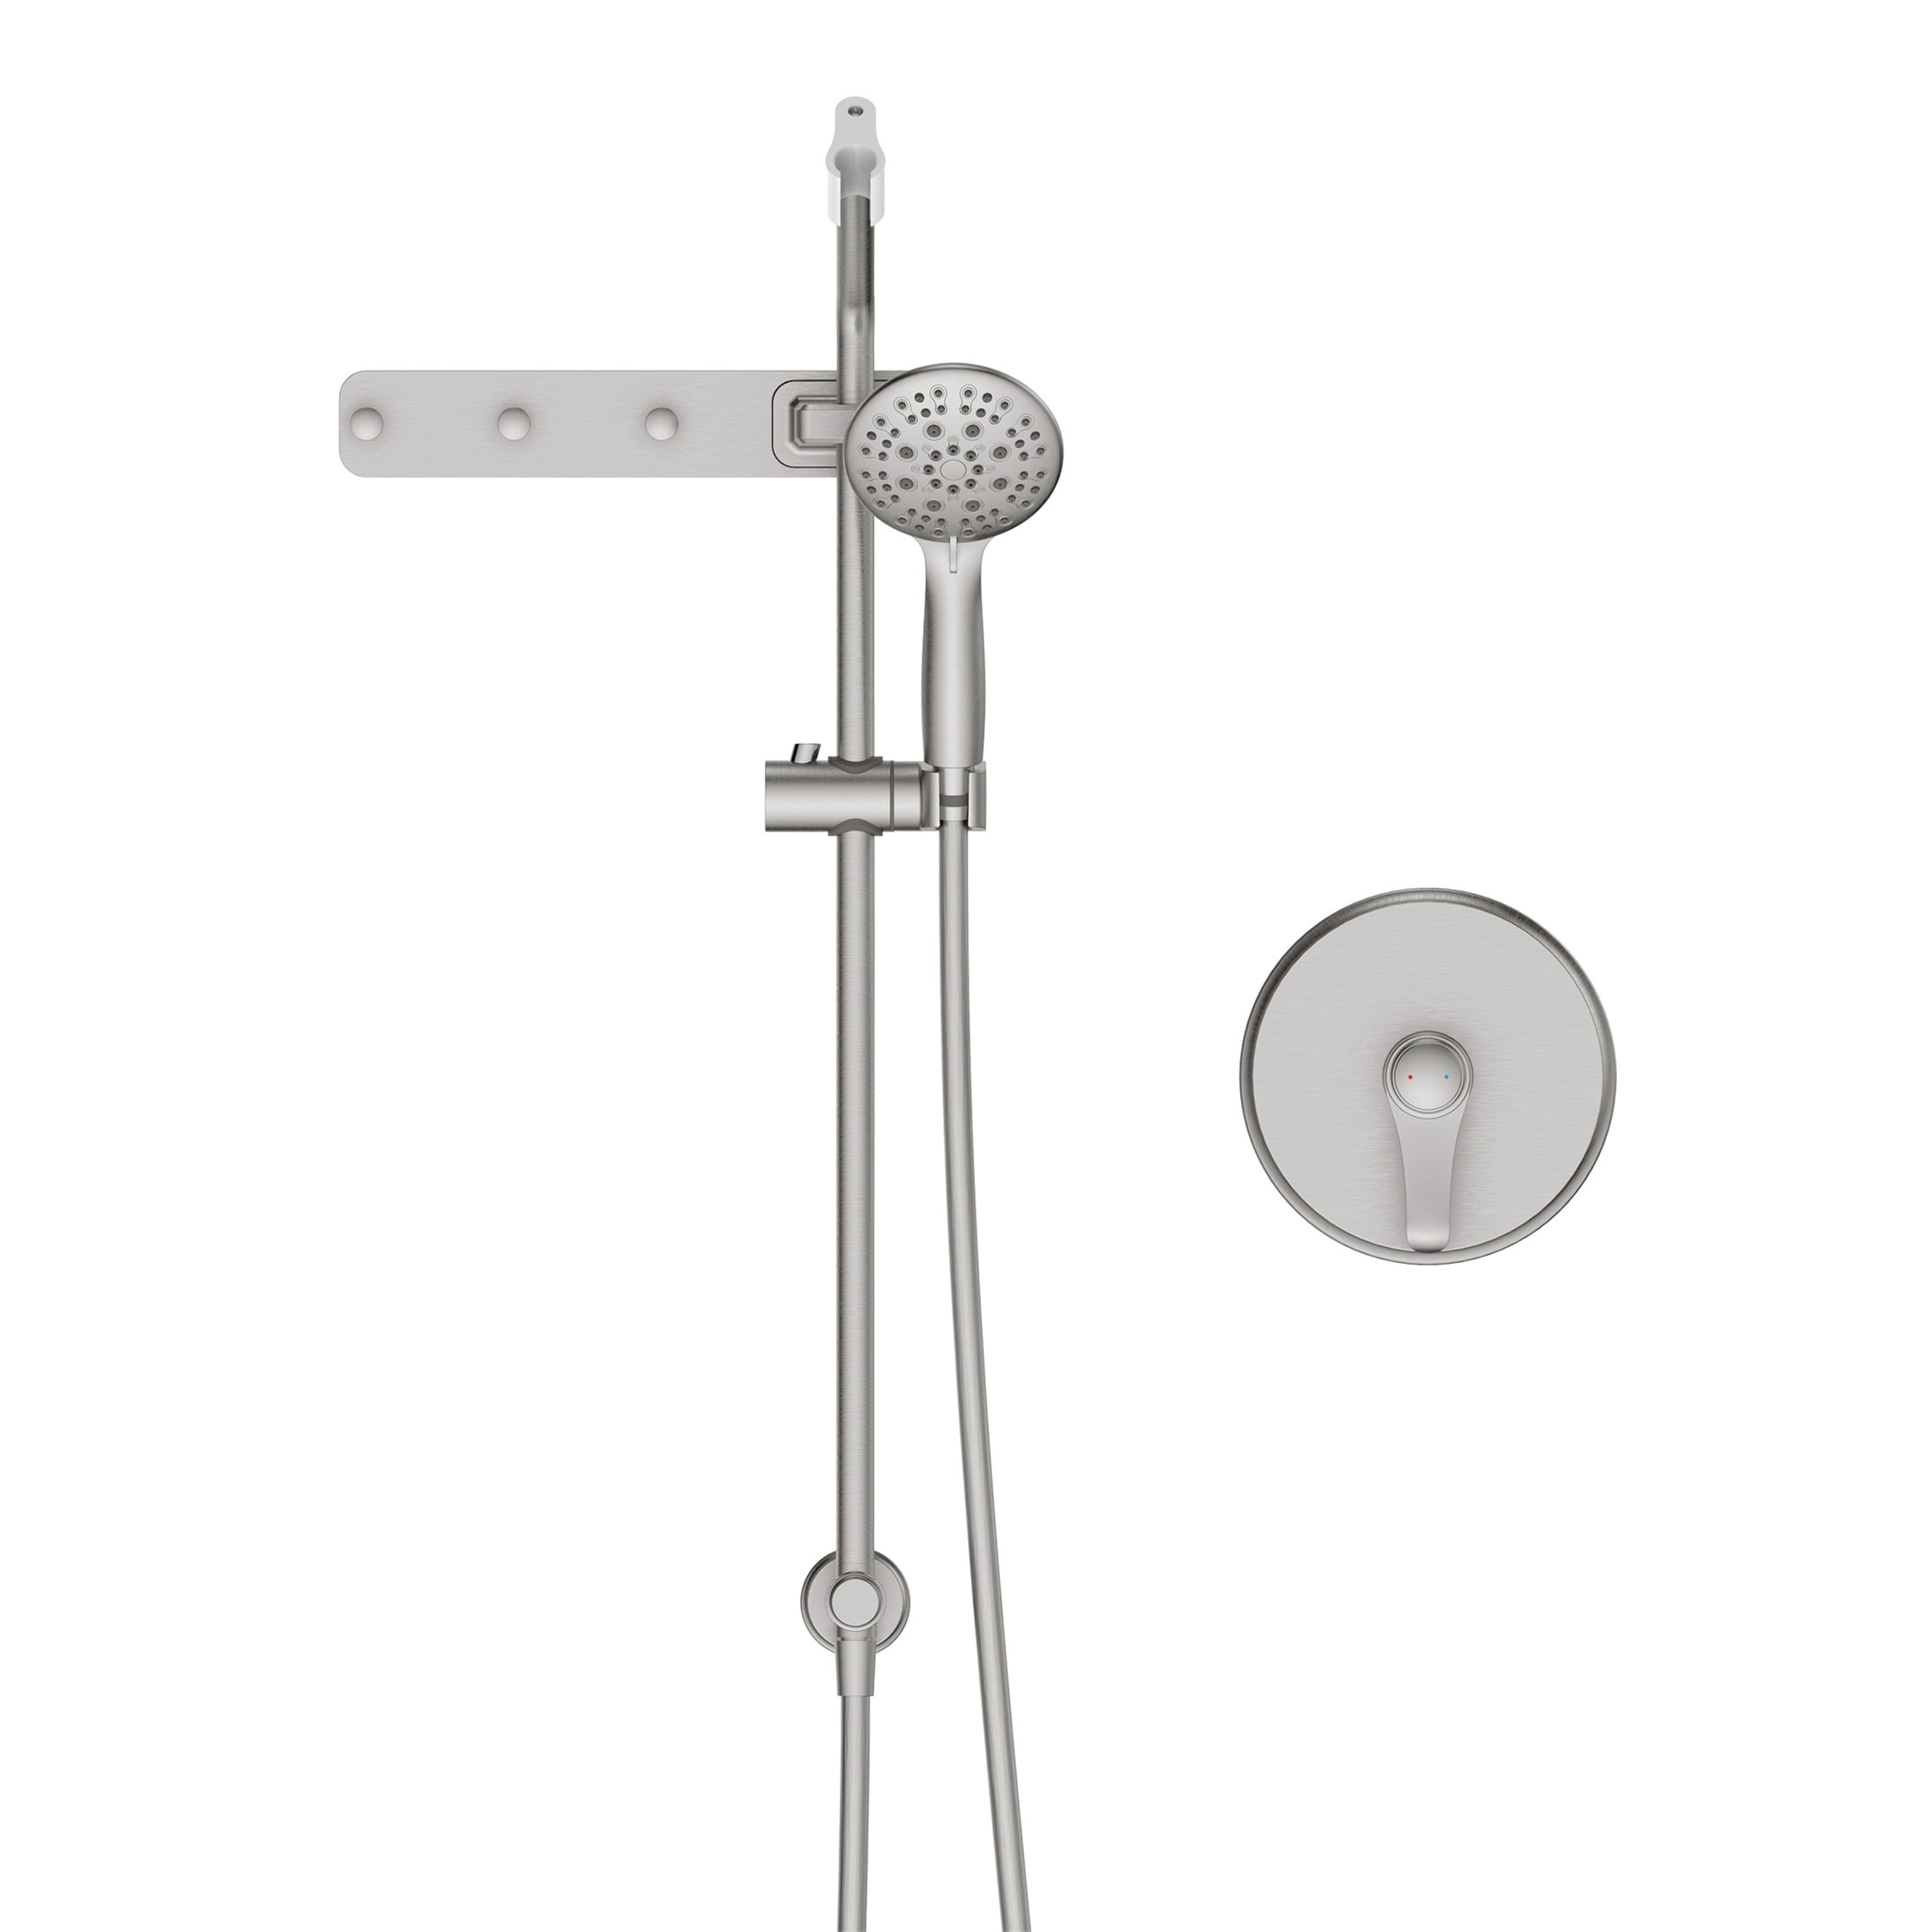 https://ak1.ostkcdn.com/images/products/is/images/direct/a8393fed755d1aa79363e7a8ab68d37712ee6d15/Multi-Function-Shower-Head-Shower-System-With-Storage-Hook.jpg